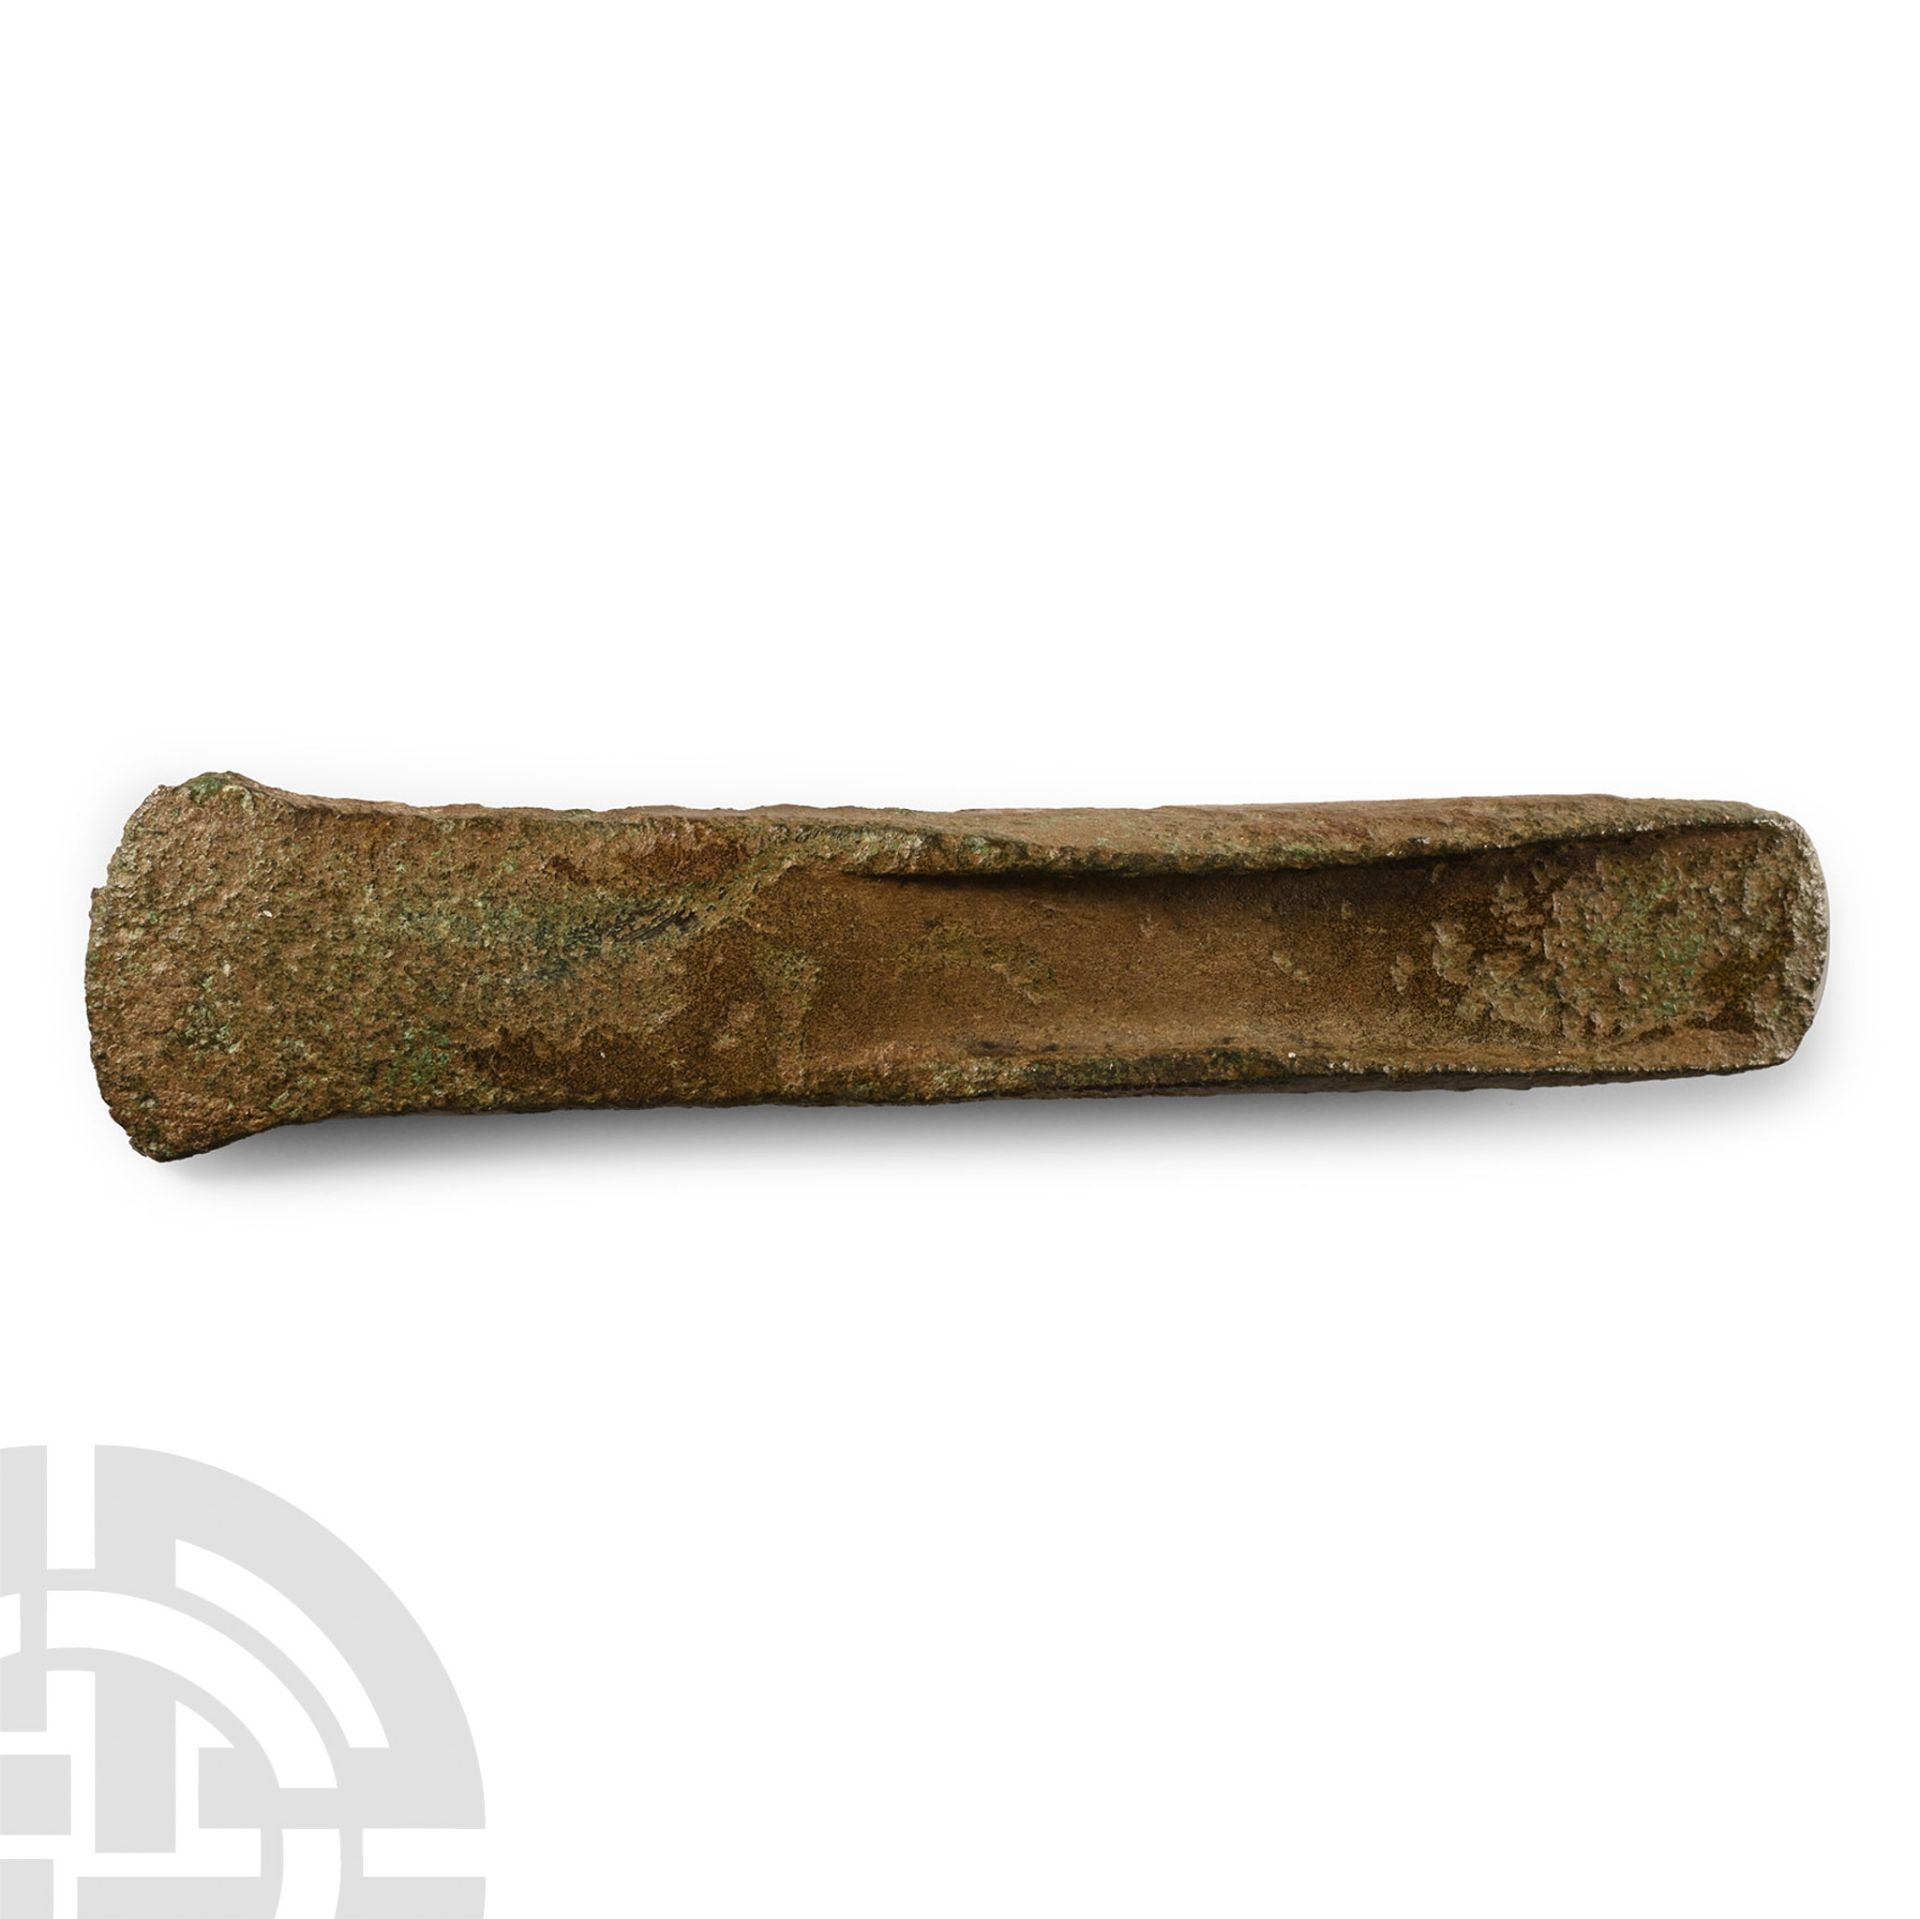 Bronze Age 'Yorkshire' Palstave Axehead